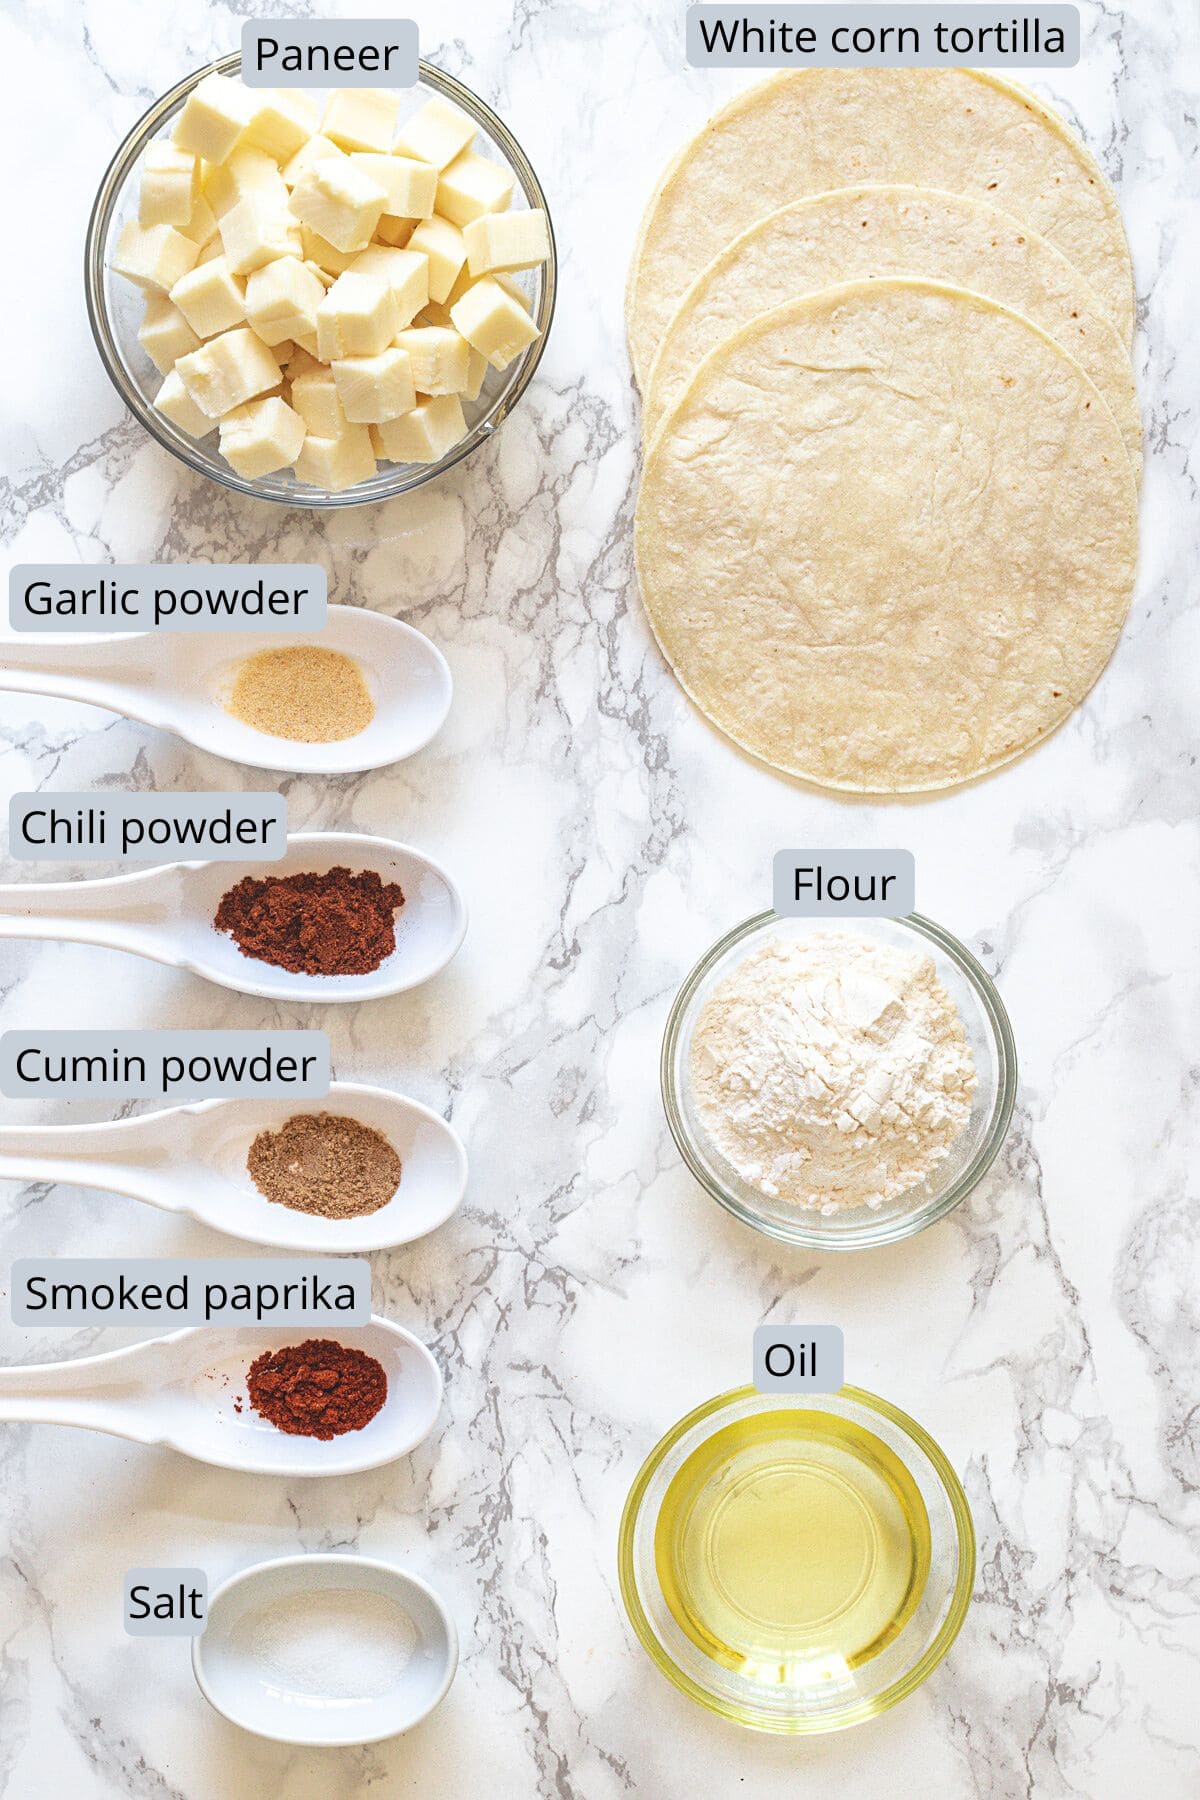 Paneer taco ingredients in spoons and bowls with labels.